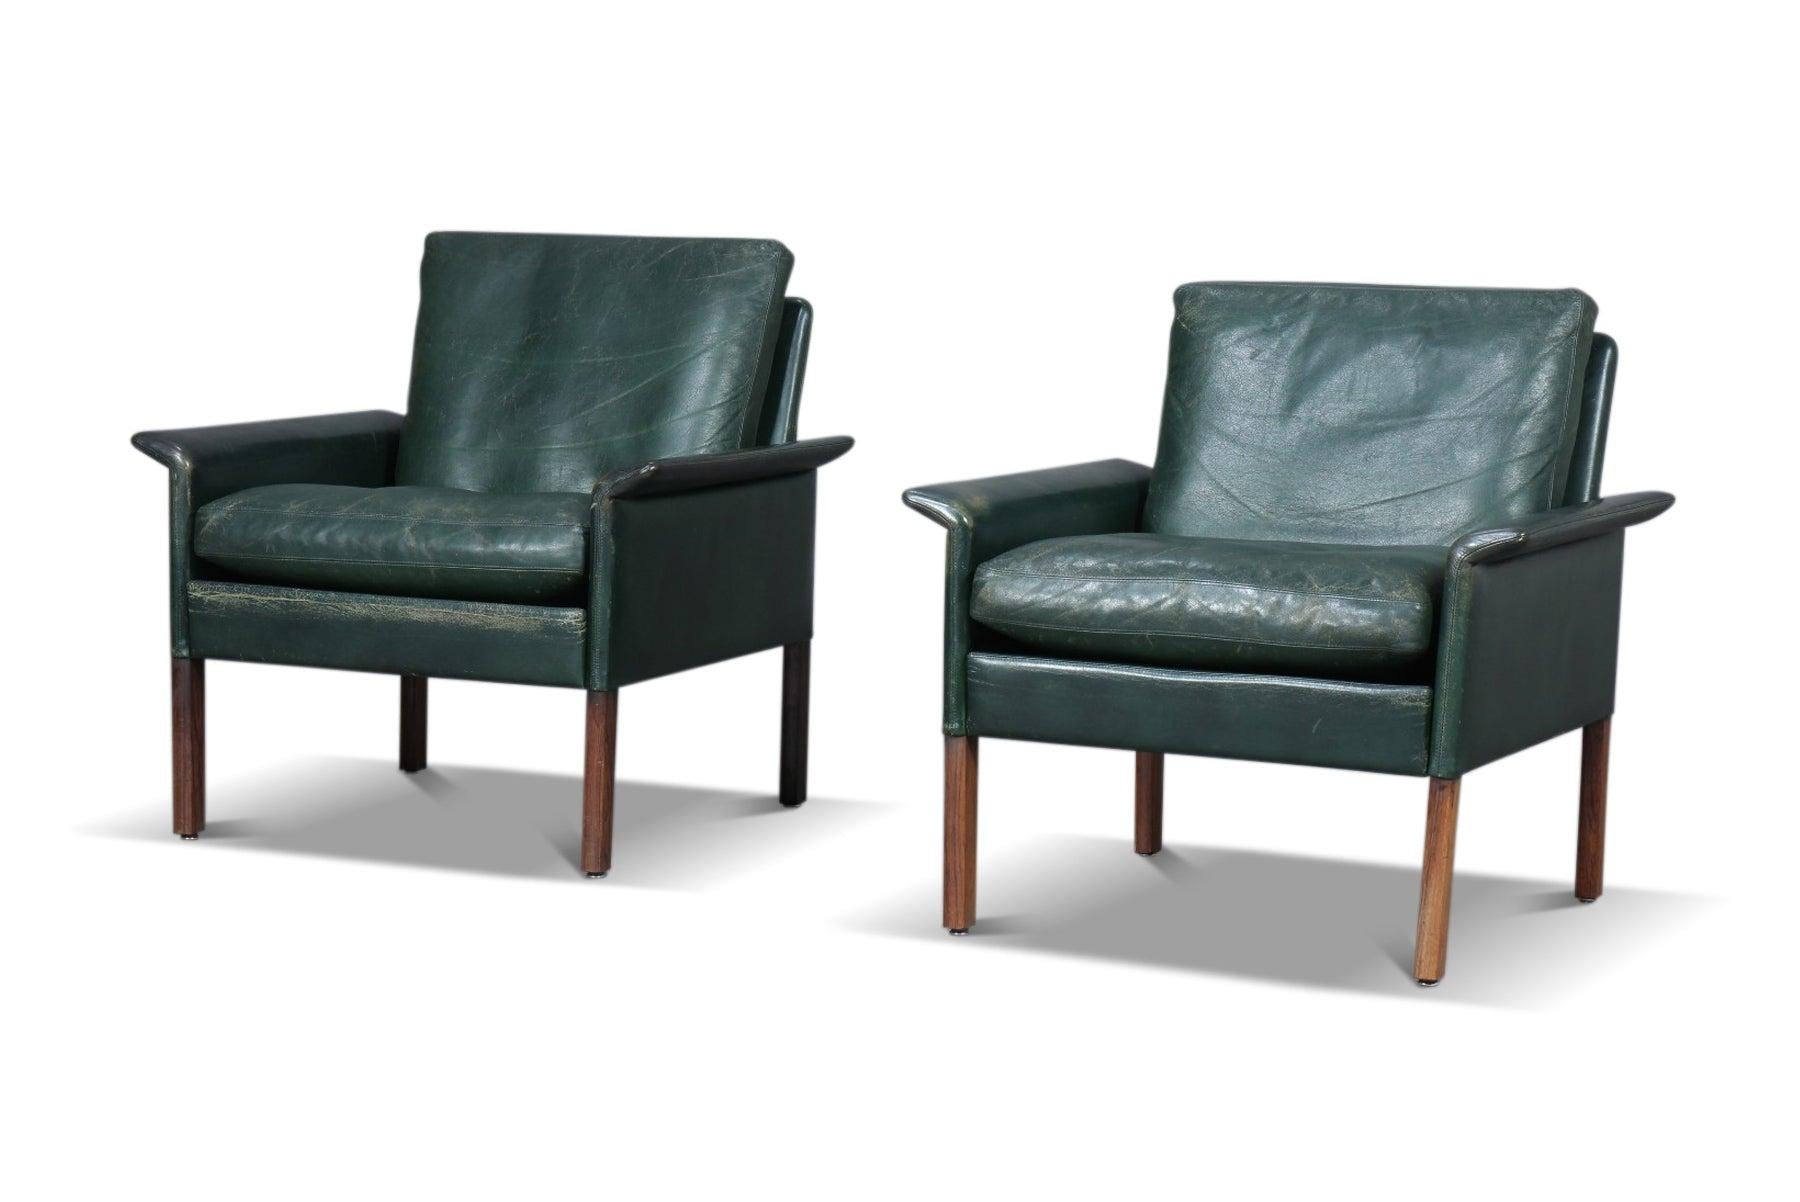 Pair of Hans Olsen Lounge Chairs in Green Leather + Rosewood In Excellent Condition For Sale In Berkeley, CA